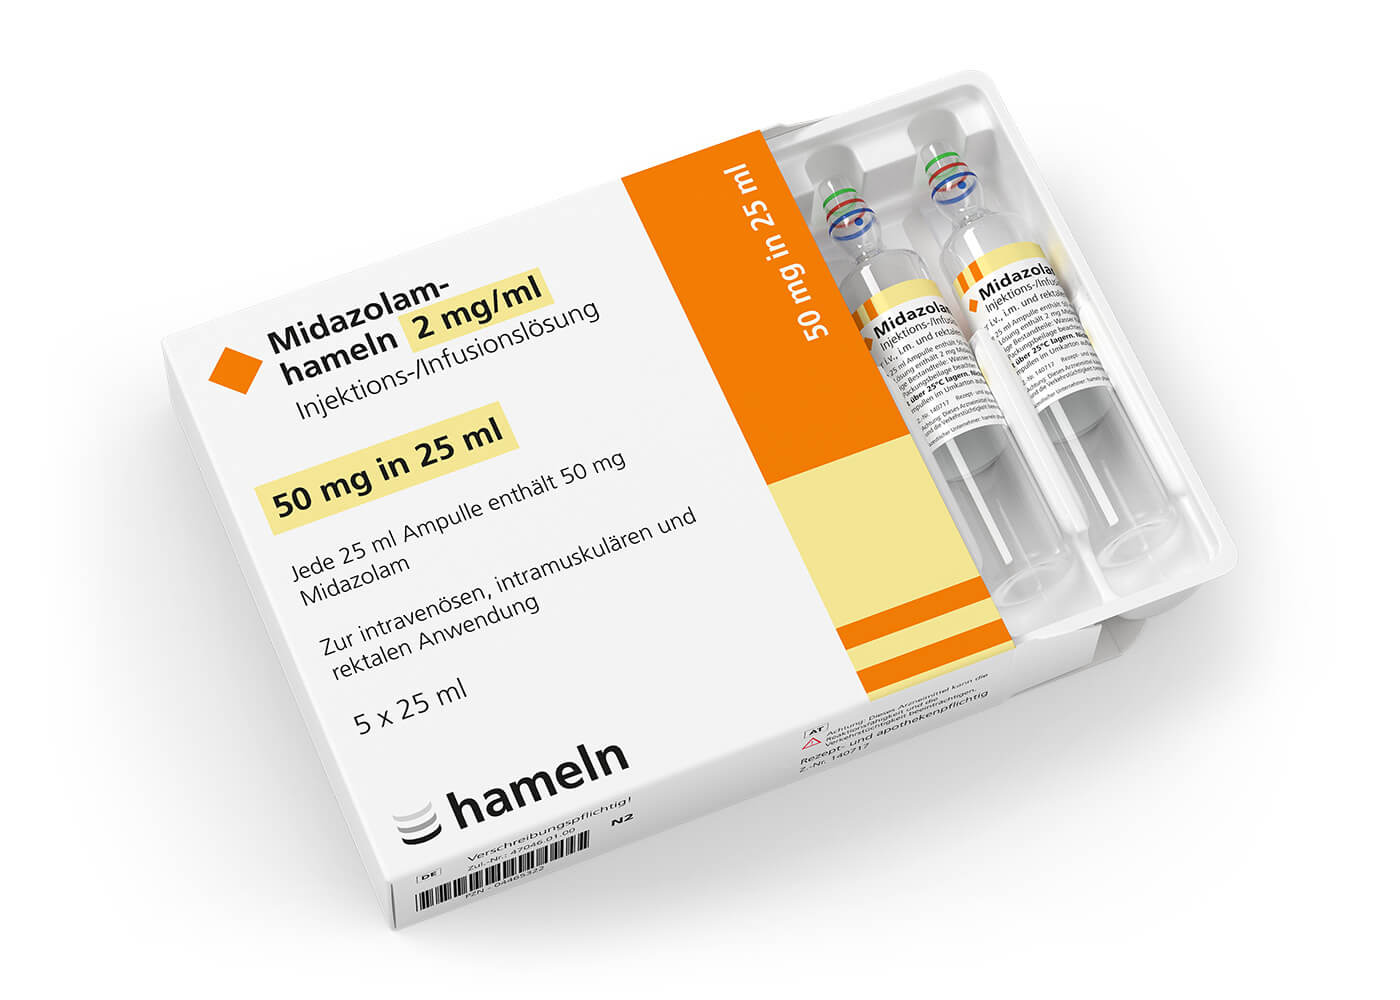 Midazolam_DE-AT_2_mg-ml_in_25_ml_Pack-Amp_5St_SH_2022-04